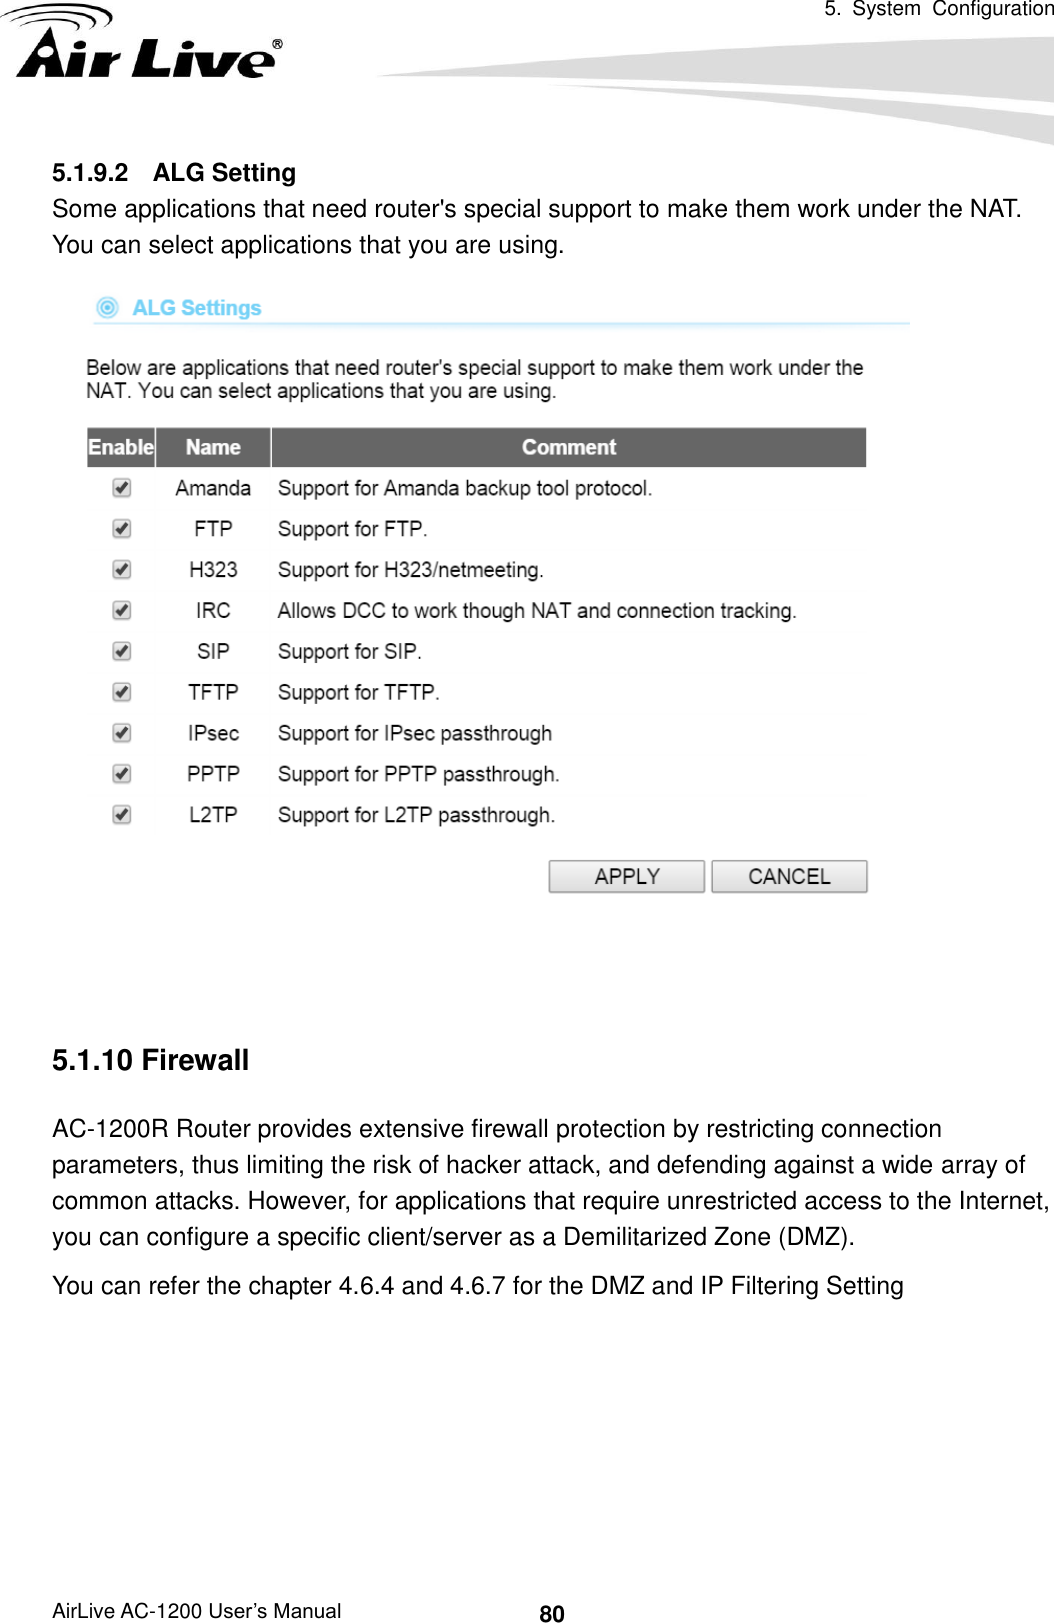   5.  System  Configuration AirLive AC-1200 User’s Manual 80 5.1.9.2  ALG Setting Some applications that need router&apos;s special support to make them work under the NAT. You can select applications that you are using.    5.1.10 Firewall AC-1200R Router provides extensive firewall protection by restricting connection parameters, thus limiting the risk of hacker attack, and defending against a wide array of common attacks. However, for applications that require unrestricted access to the Internet, you can configure a specific client/server as a Demilitarized Zone (DMZ).     You can refer the chapter 4.6.4 and 4.6.7 for the DMZ and IP Filtering Setting        